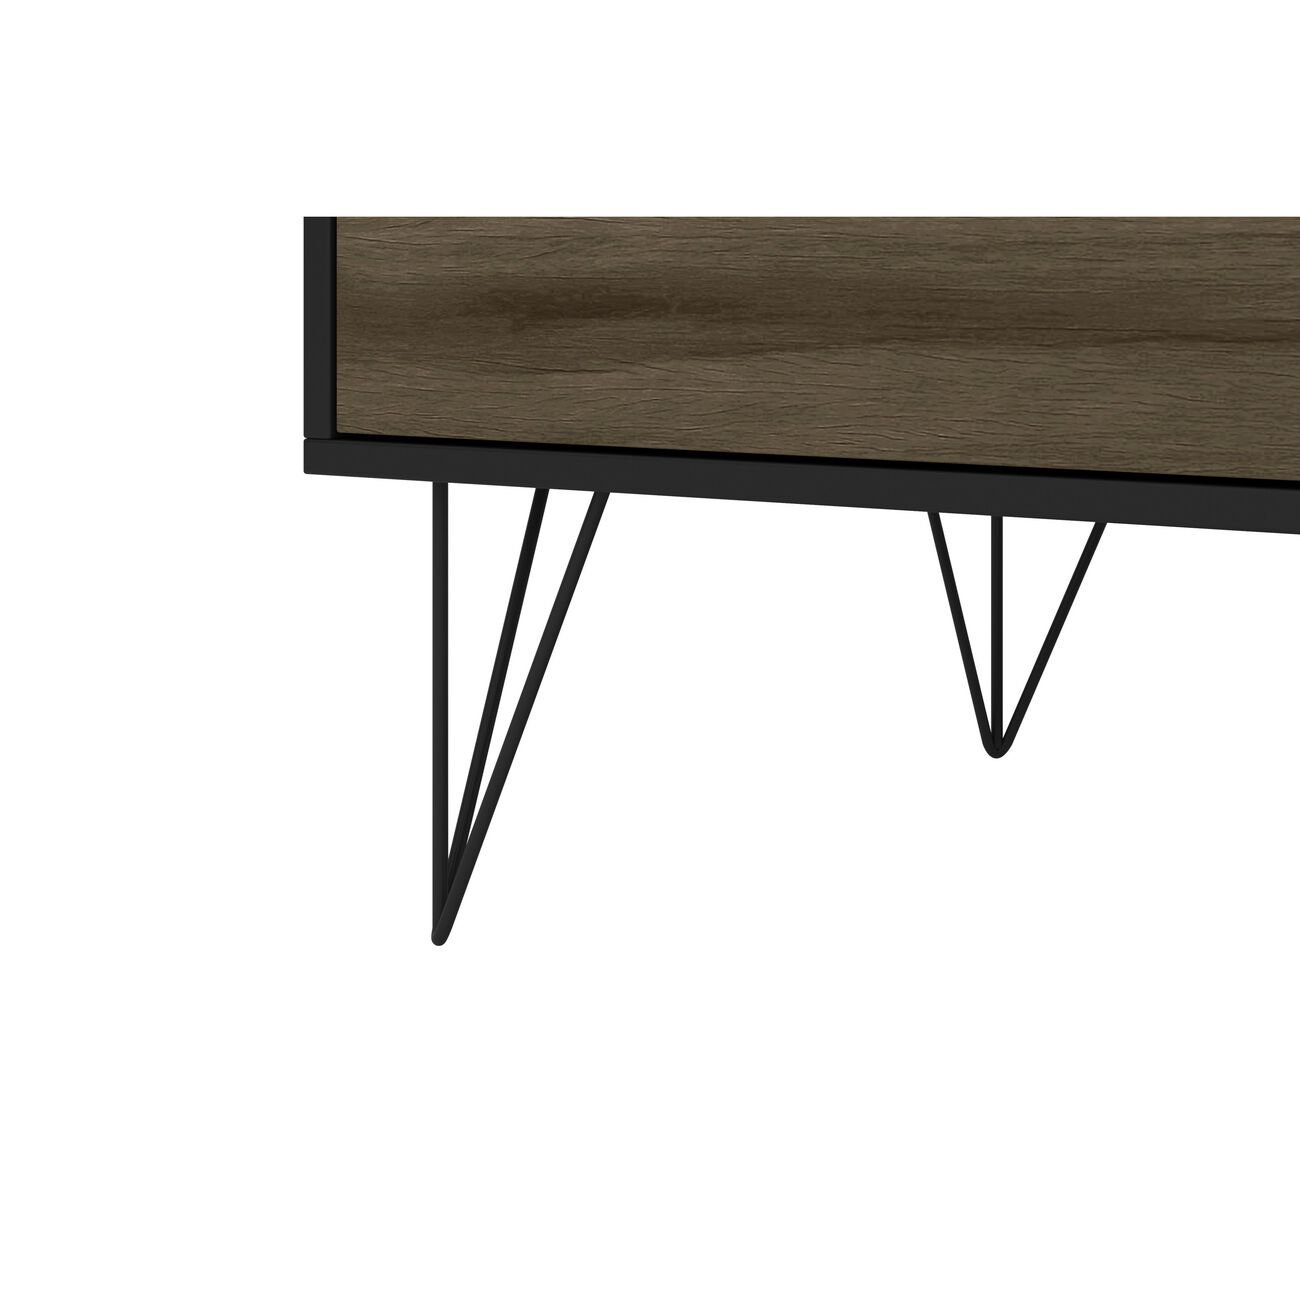 2 Drawer Wooden Rectangular Coffee Table With Hairpin Legs, Black and Brown